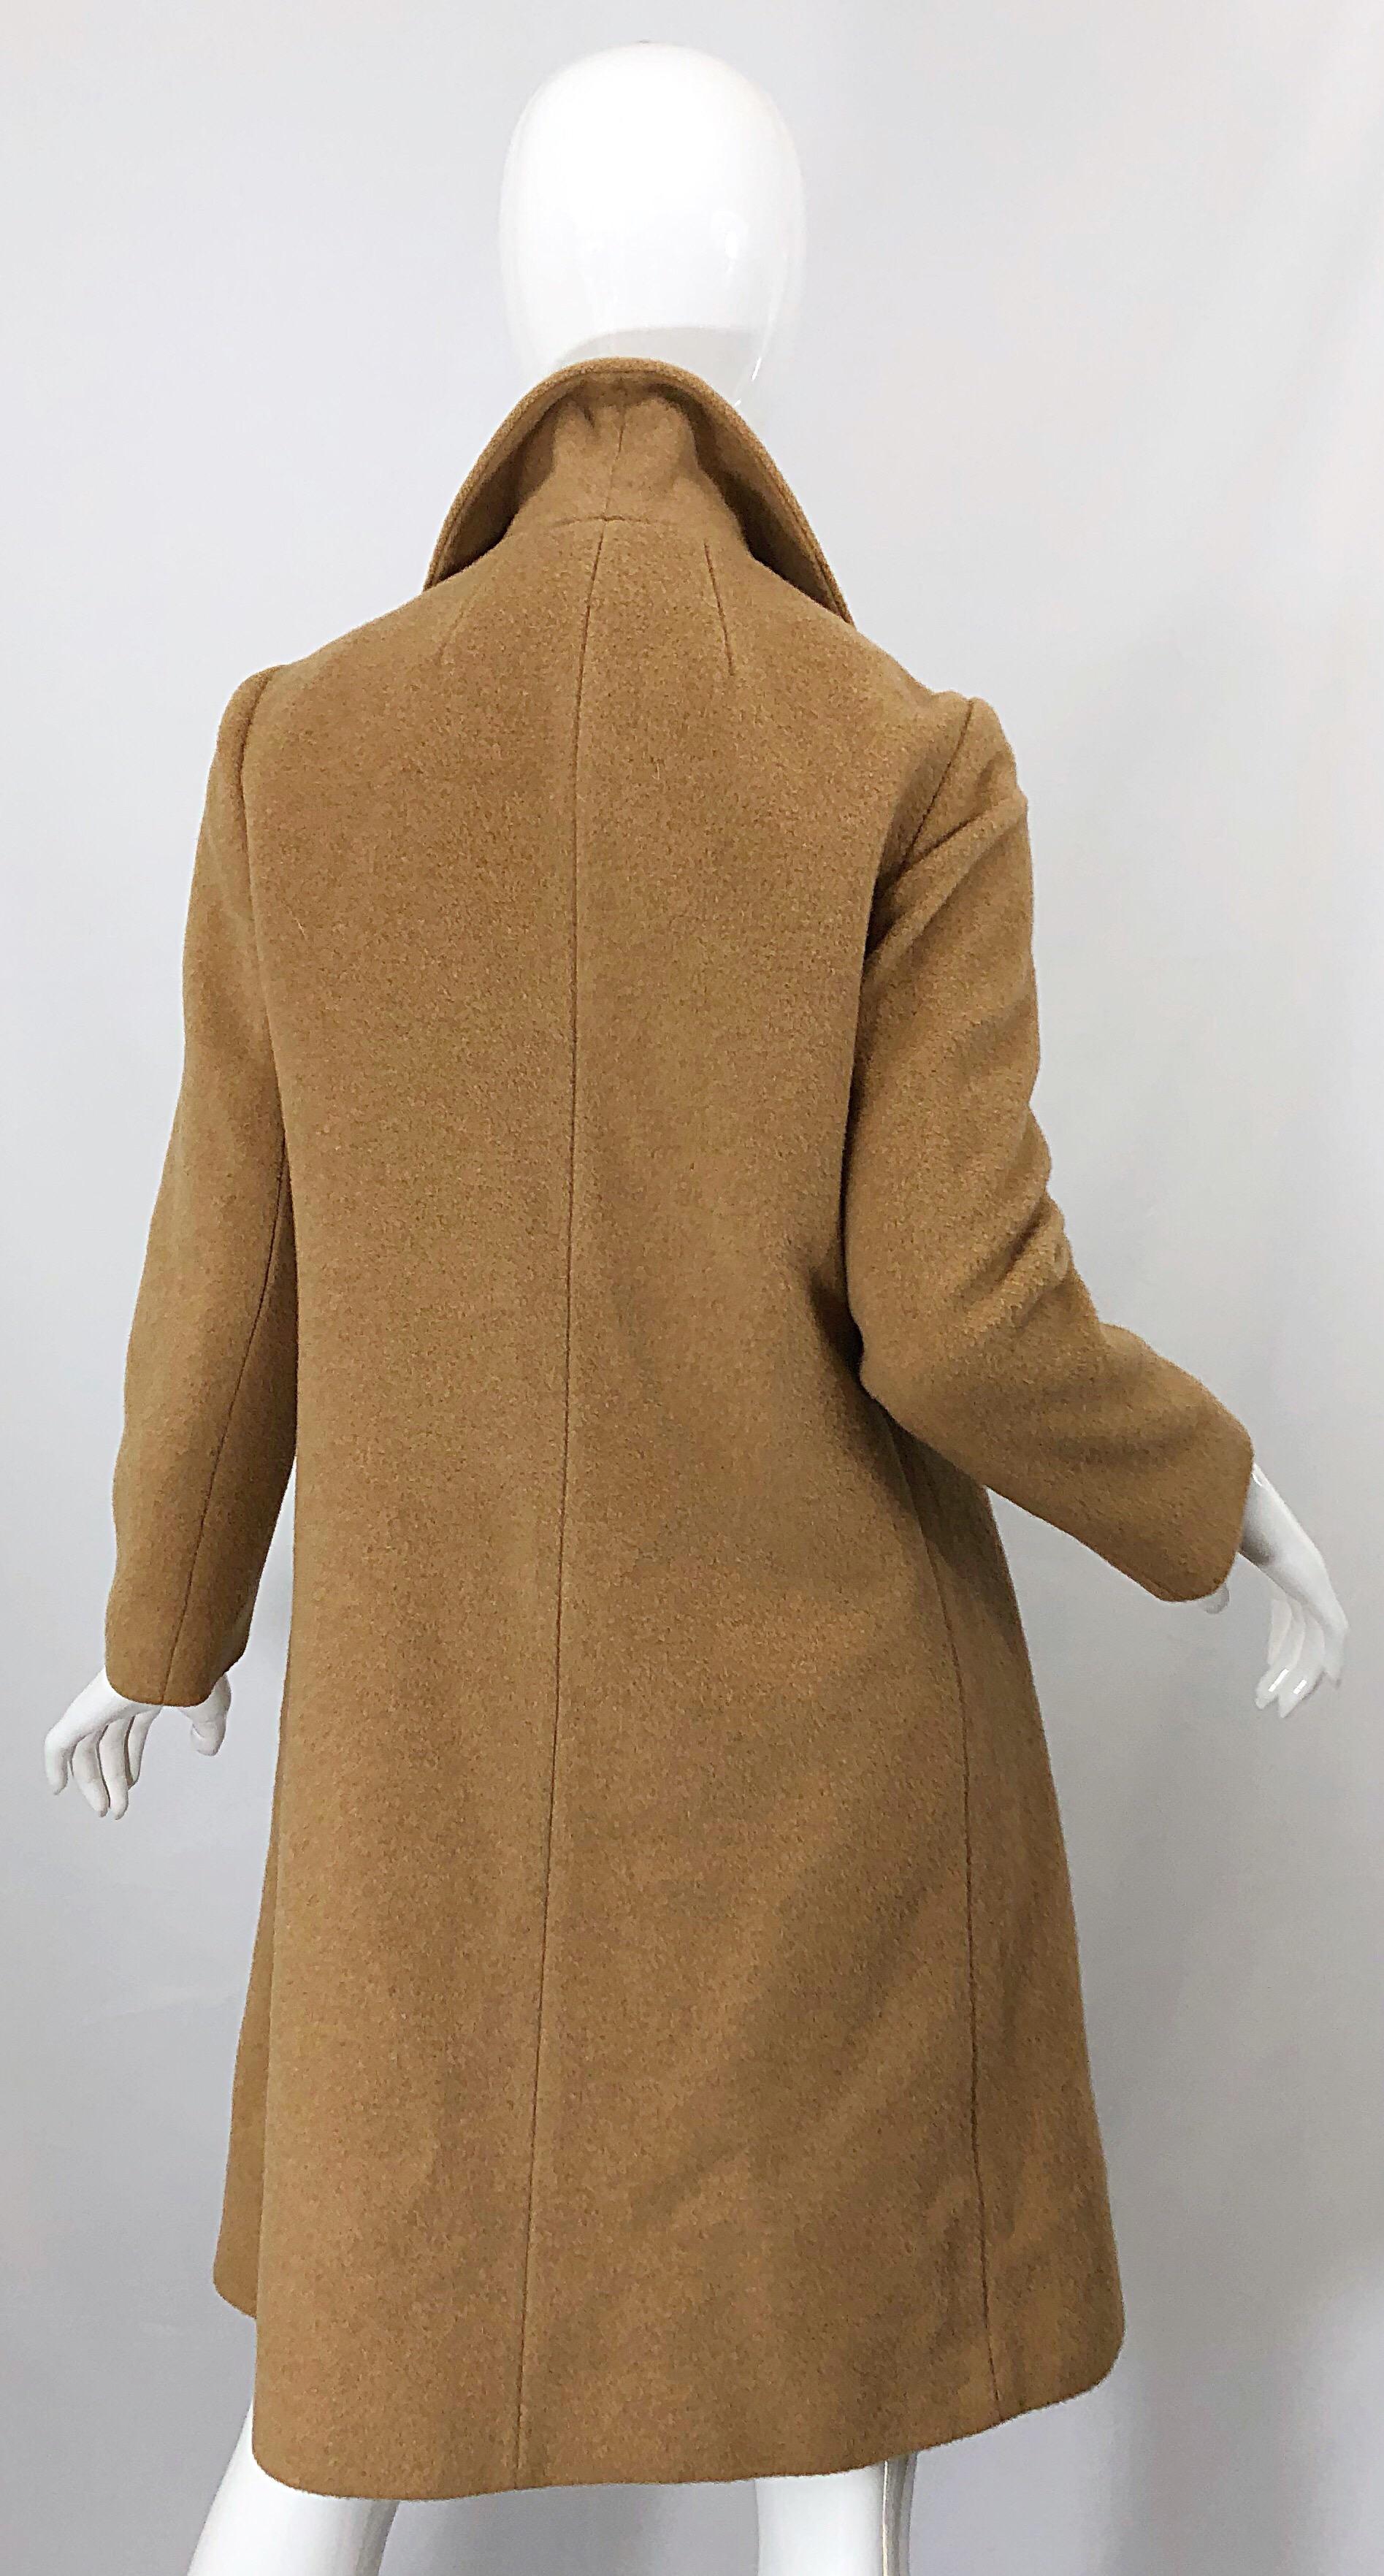 Chic 1960s Camel Tan Camels Hair Wool Double Breasted Vintage Swing Jacket Coat 5